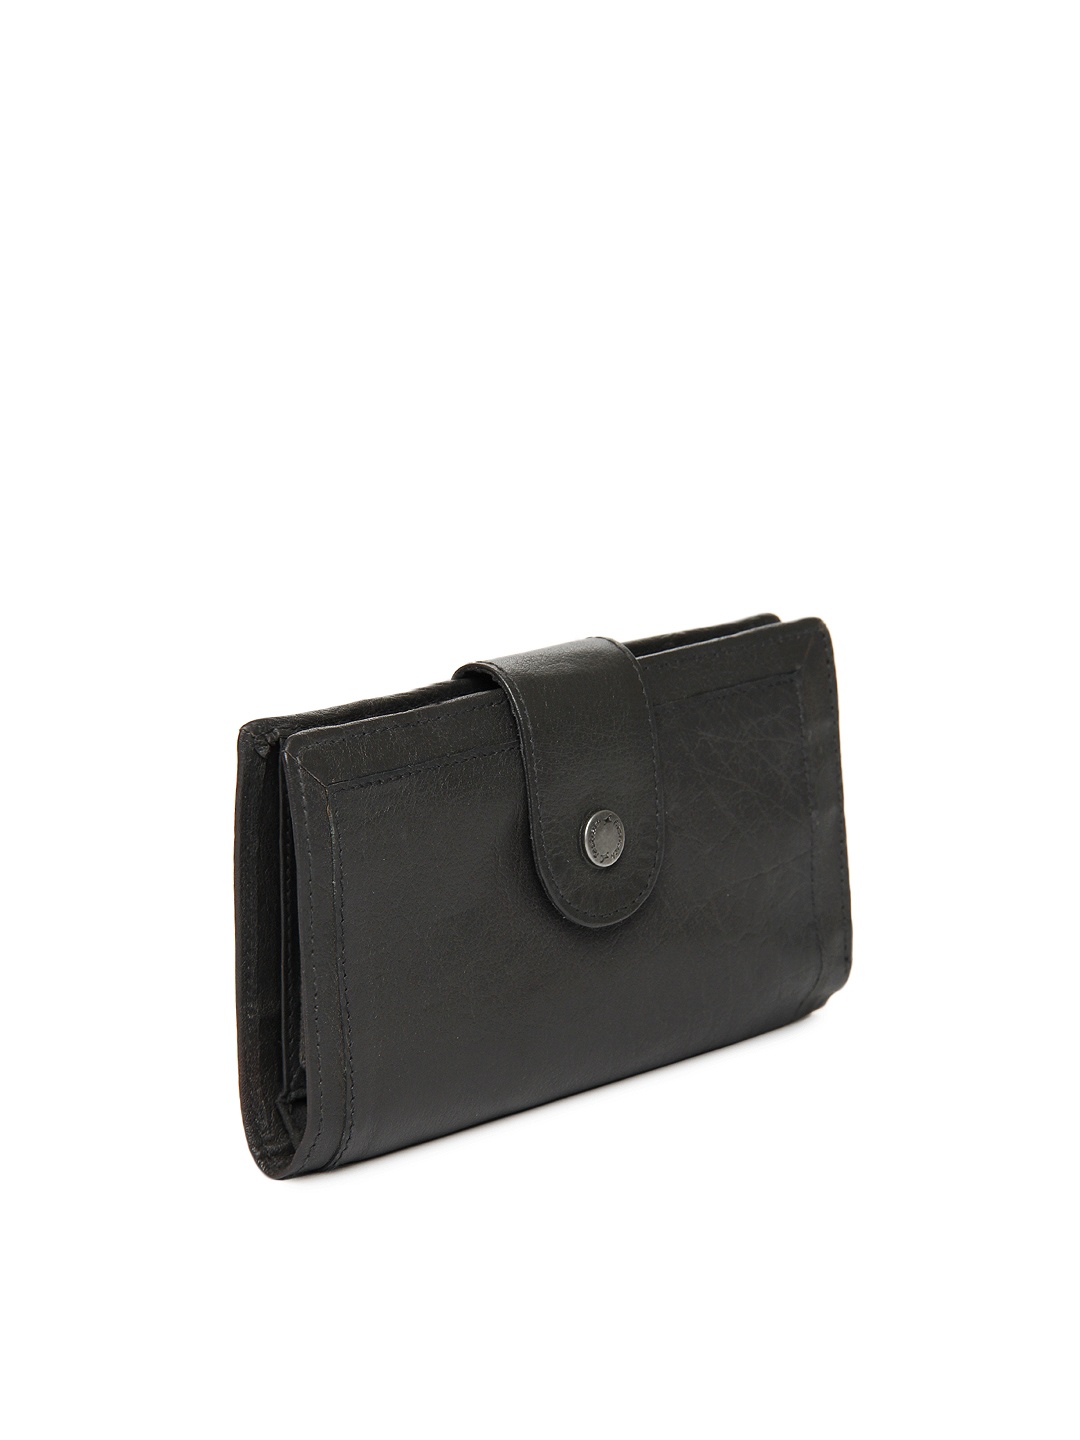 Myntra Fastrack Women Charcoal Grey Leather Wallet 547615 | Buy Myntra Fastrack Wallets at best ...